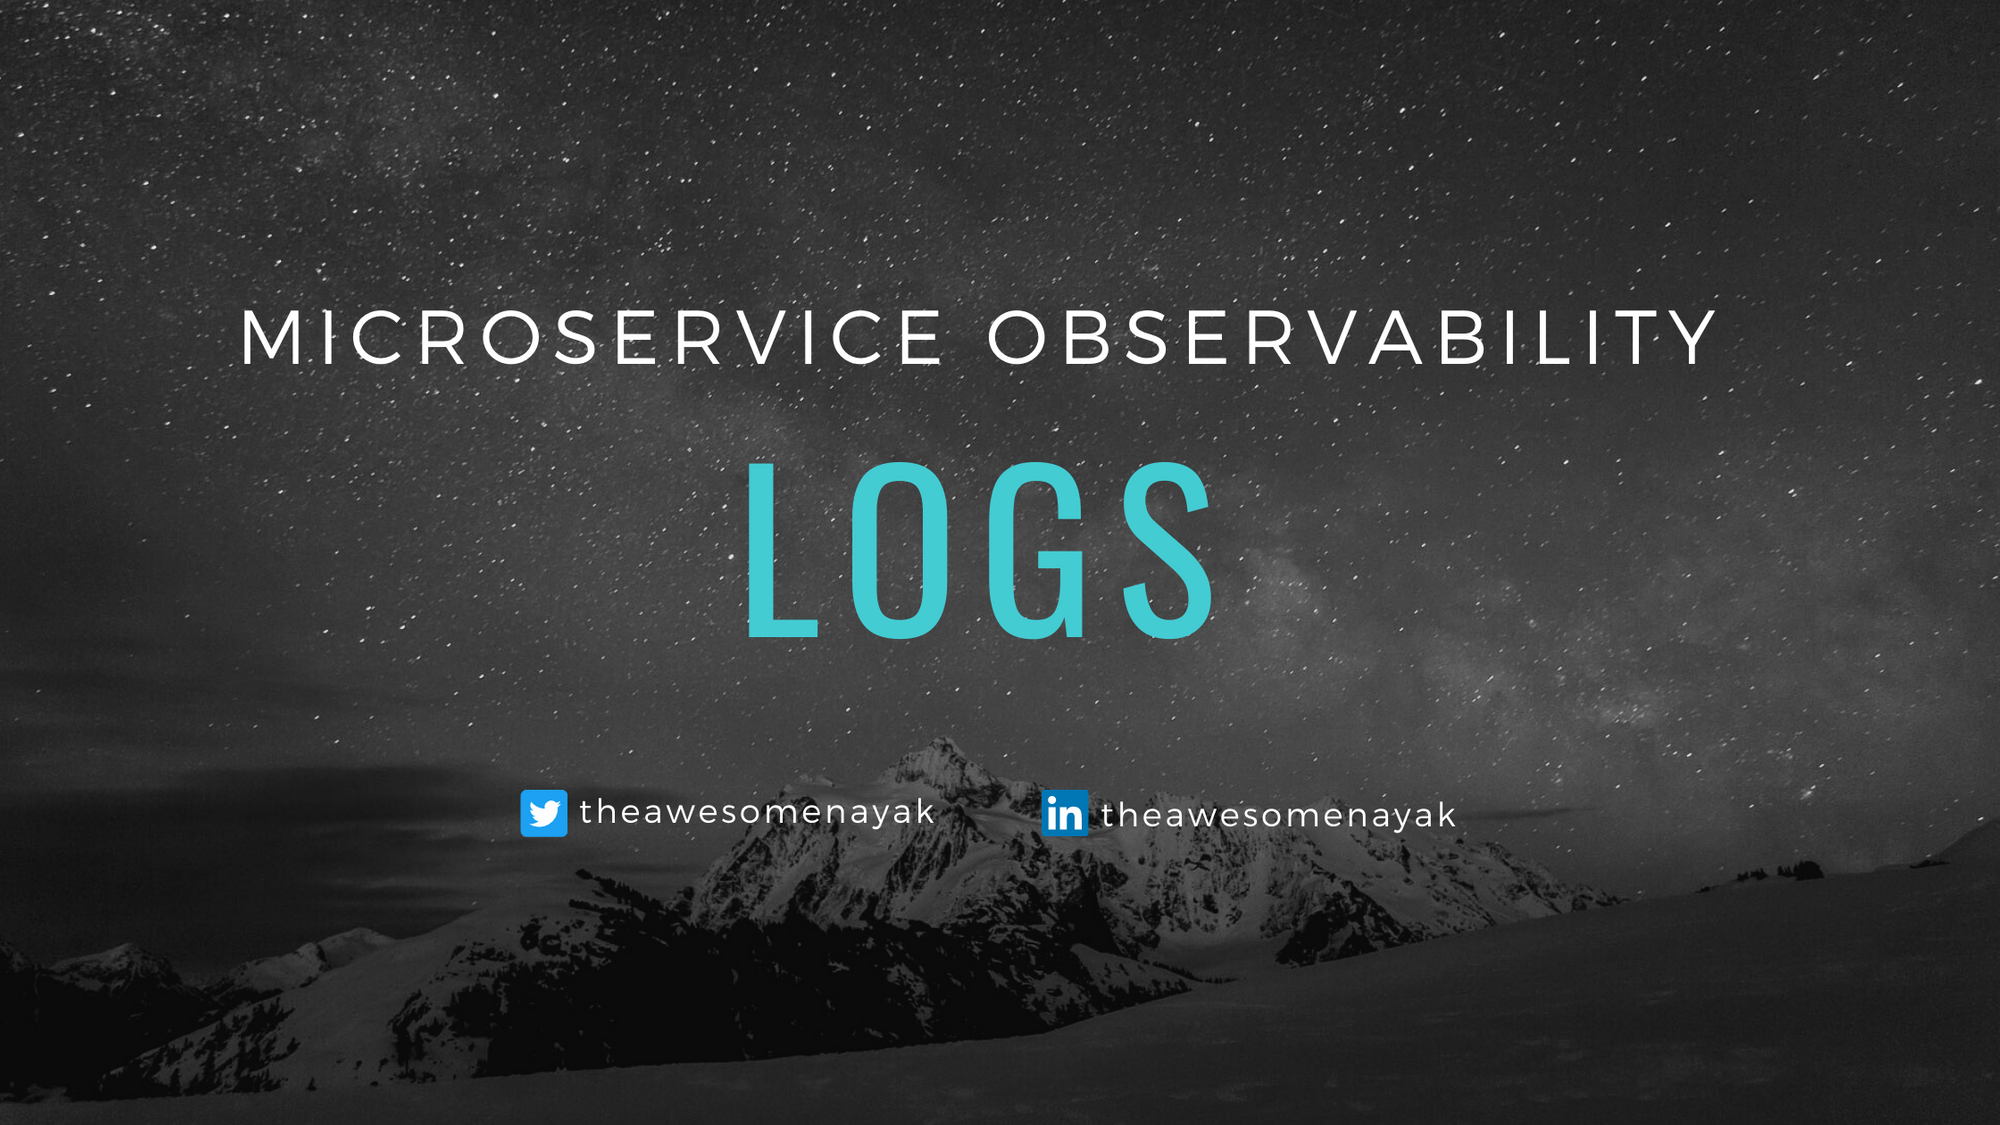 How to Handle Logs in Microservices